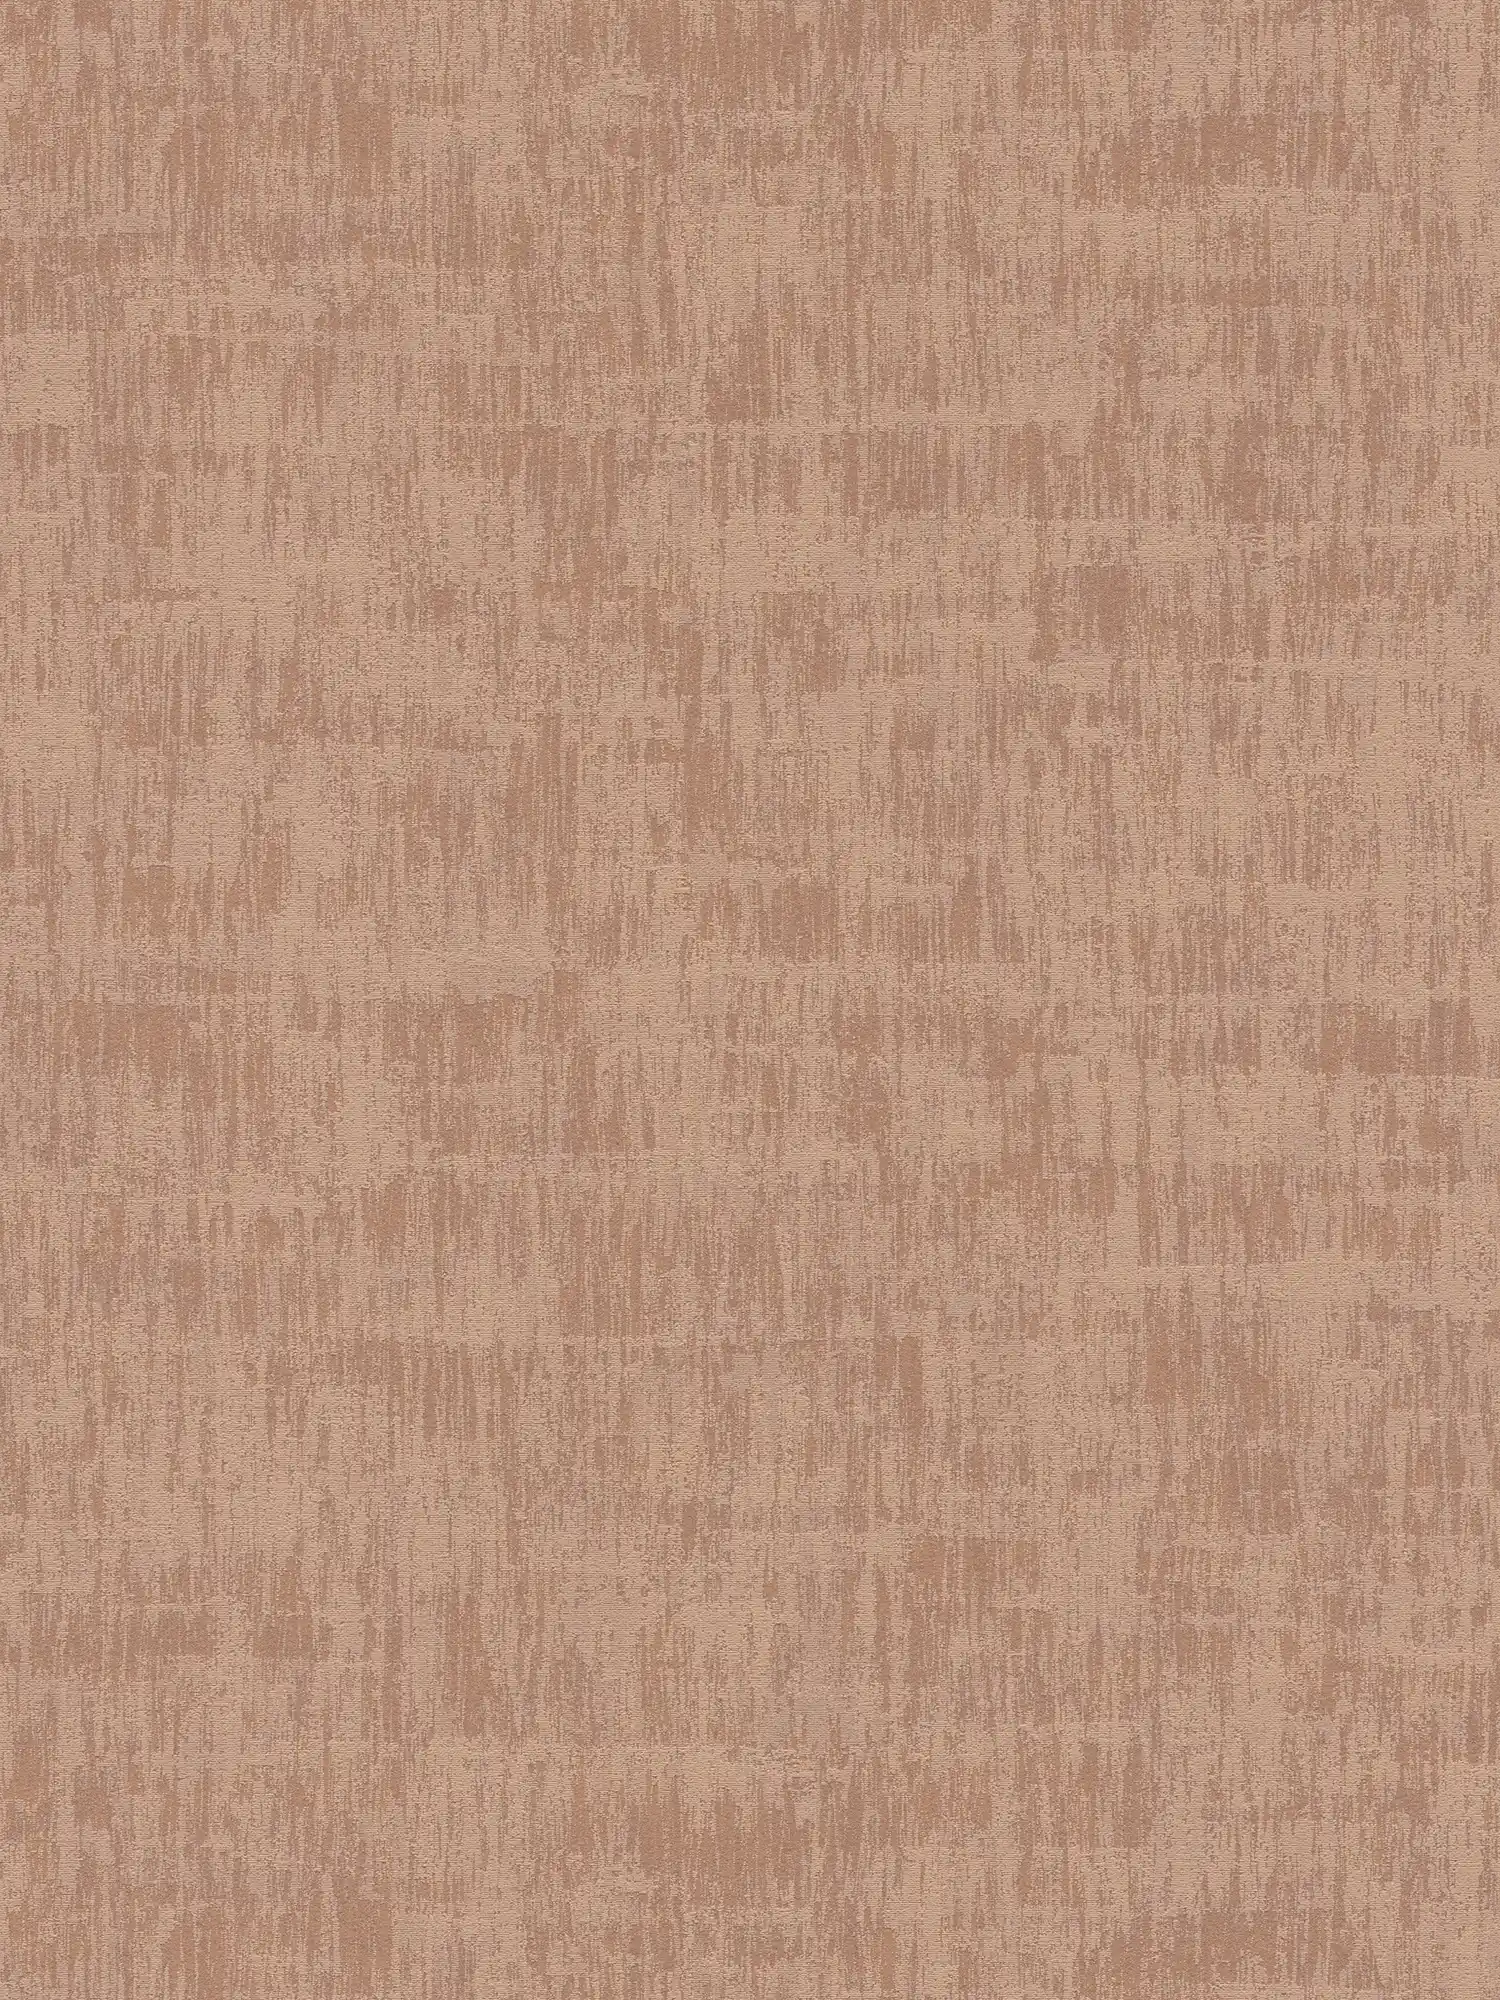 Used look wallpaper with abstract raffia pattern - pink
